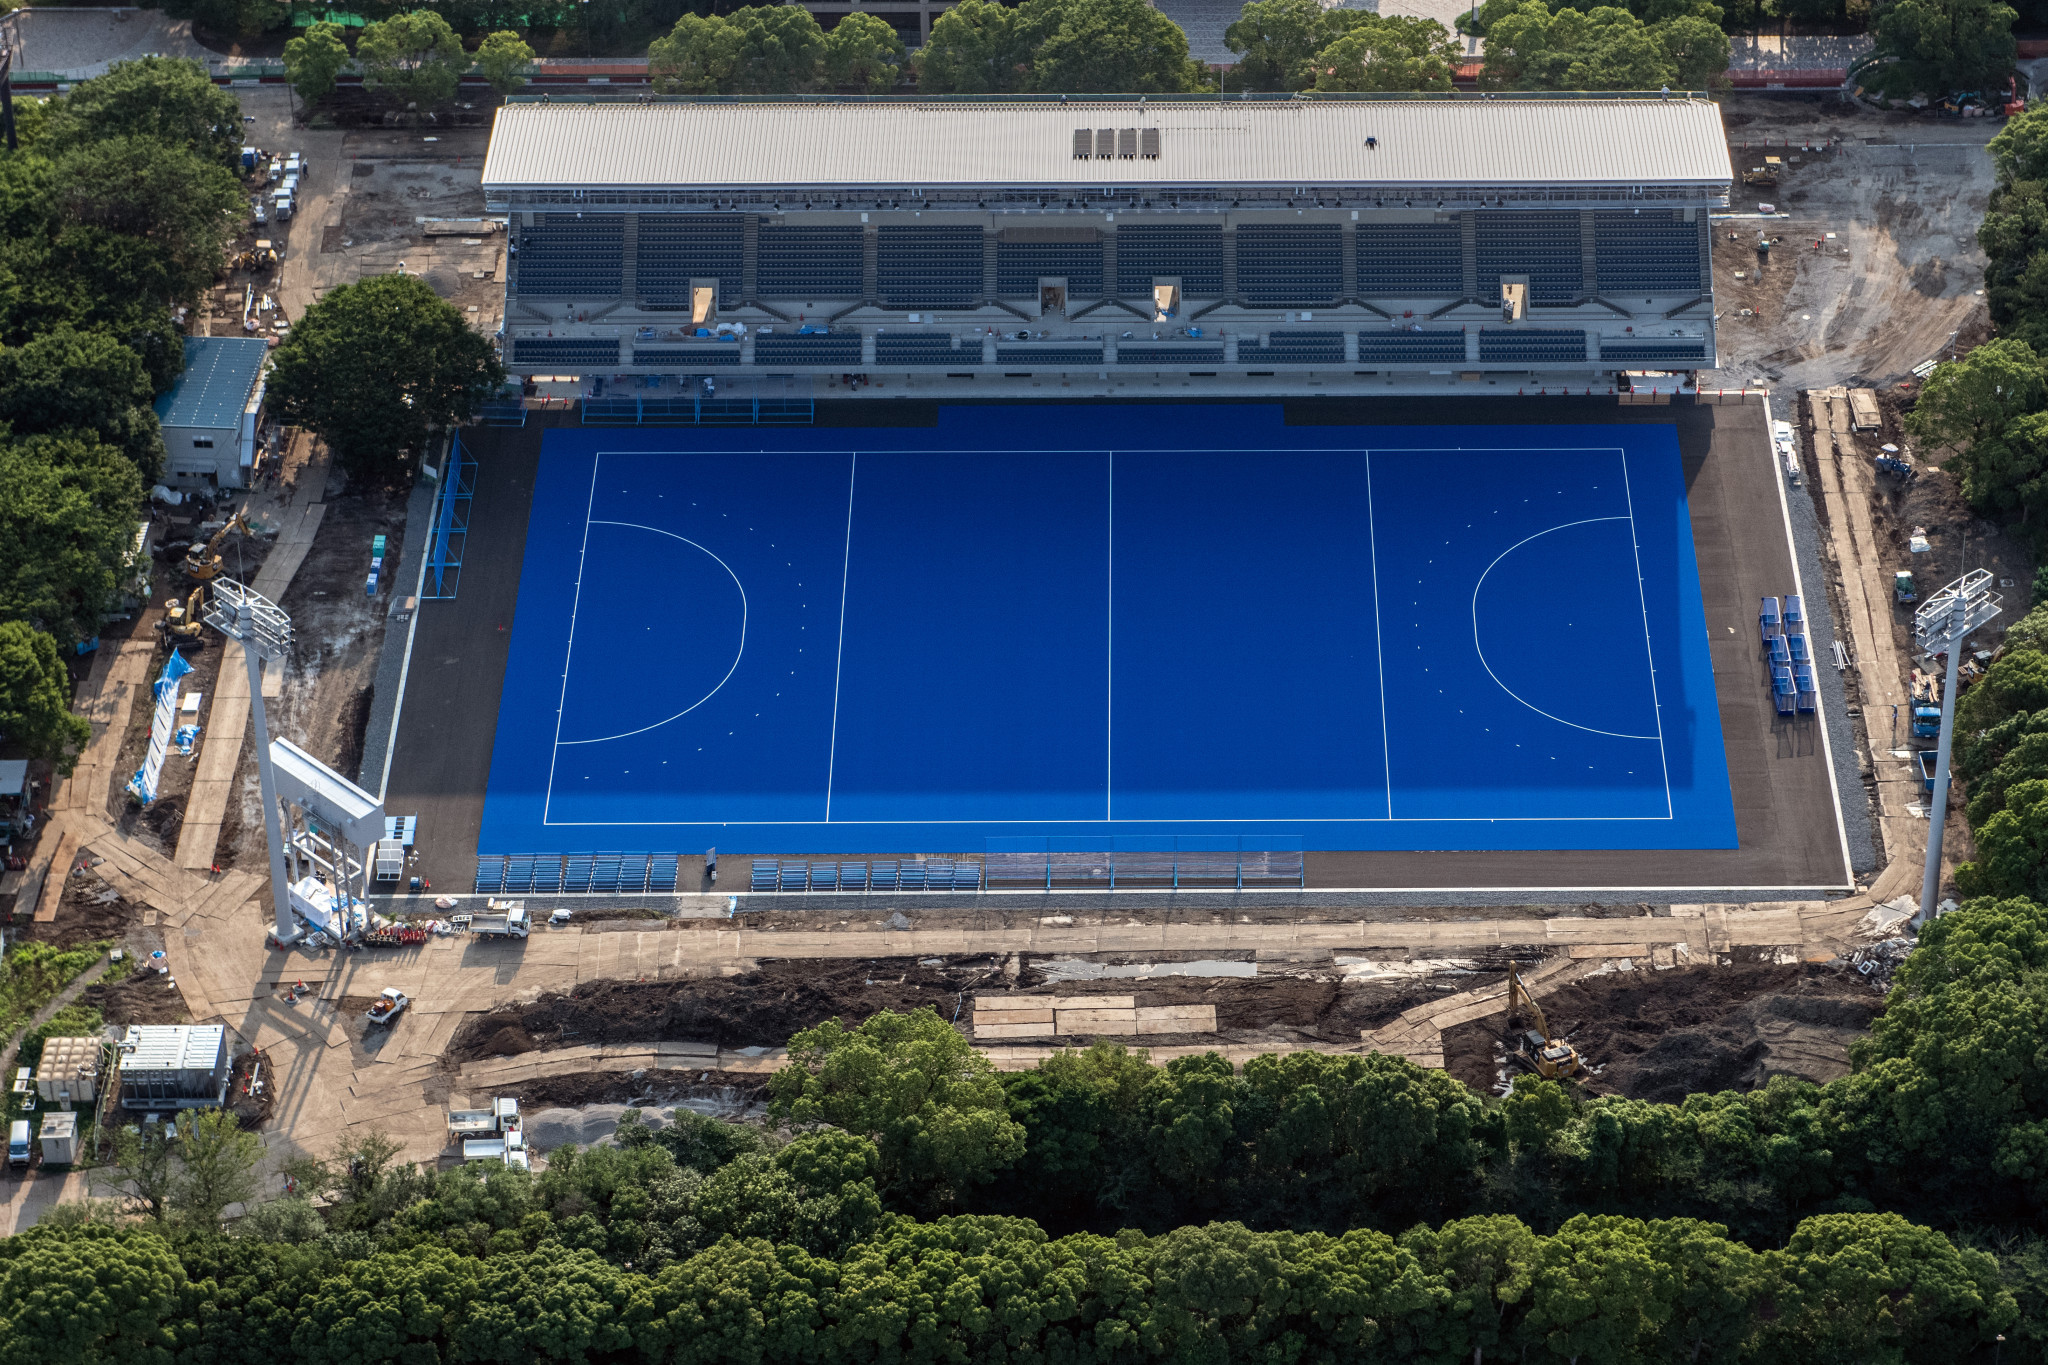 Tokyo 2020 test event series to continue with hockey competition